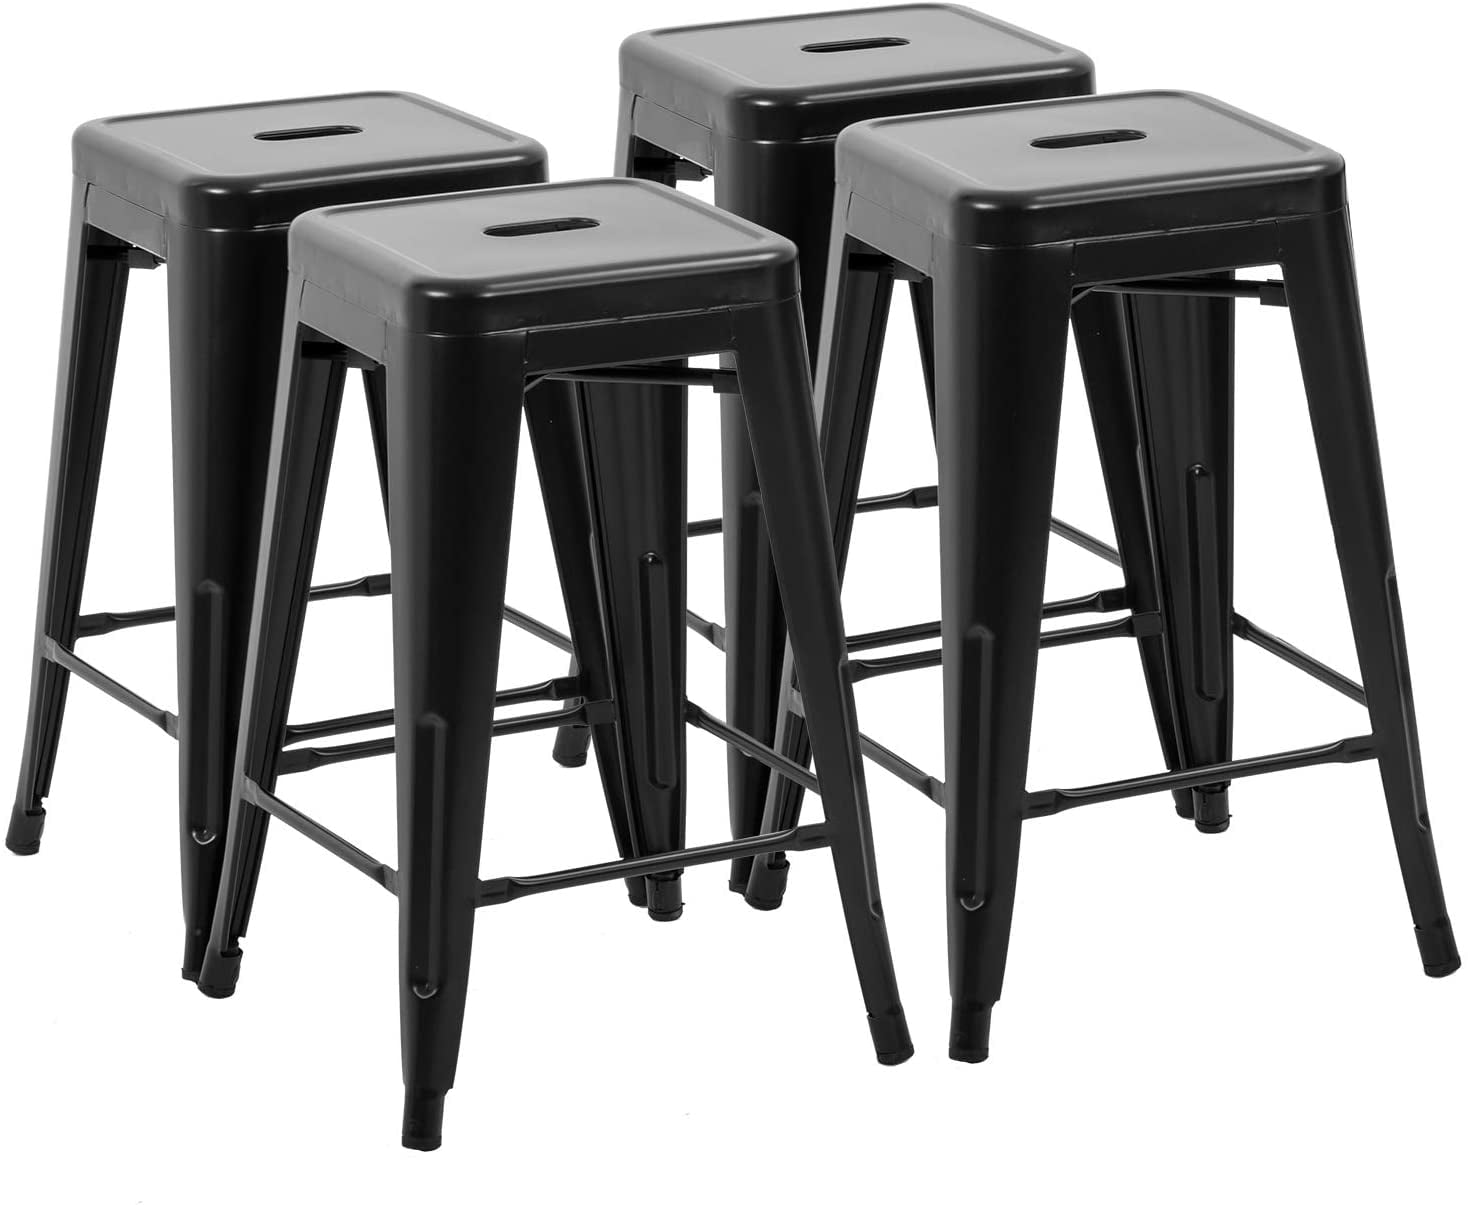 Rustic Bar Stools Set Of 2 Home Barstool Pub Industrial Tall Dining Furniture 